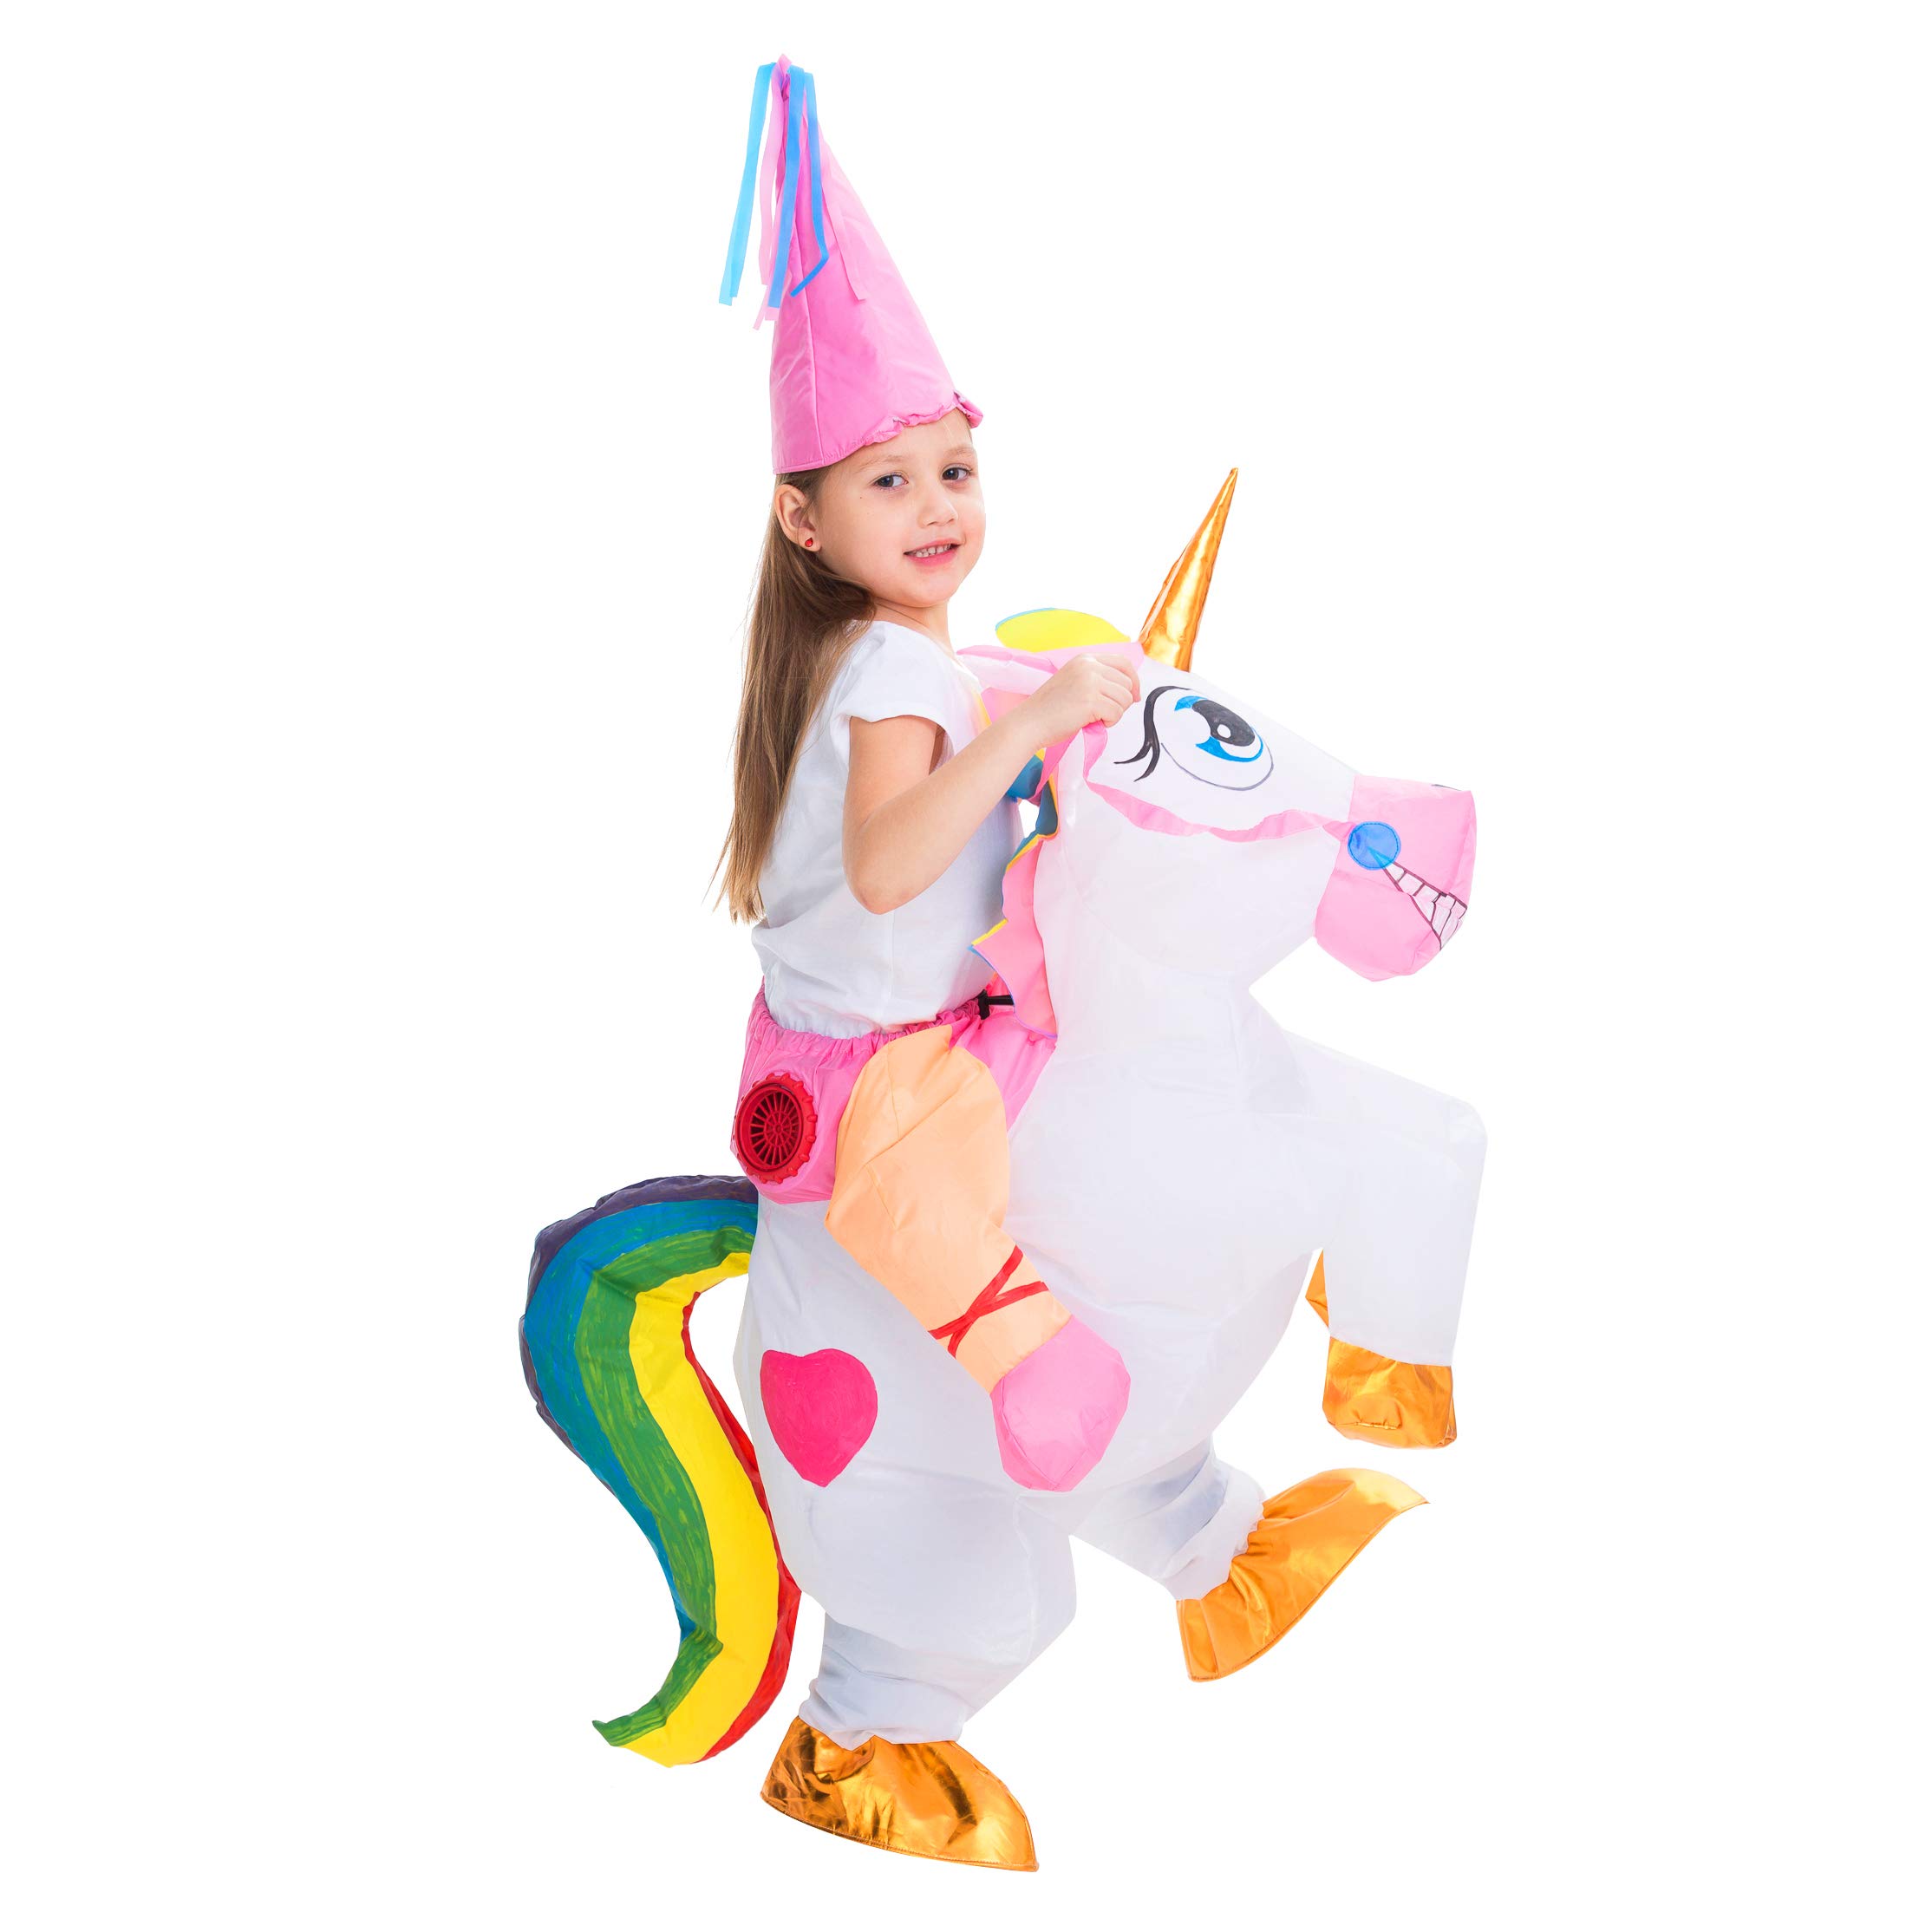 Spooktacular Creations Inflatable Costume Riding a Unicorn Air Blow-up Deluxe Halloween Costume